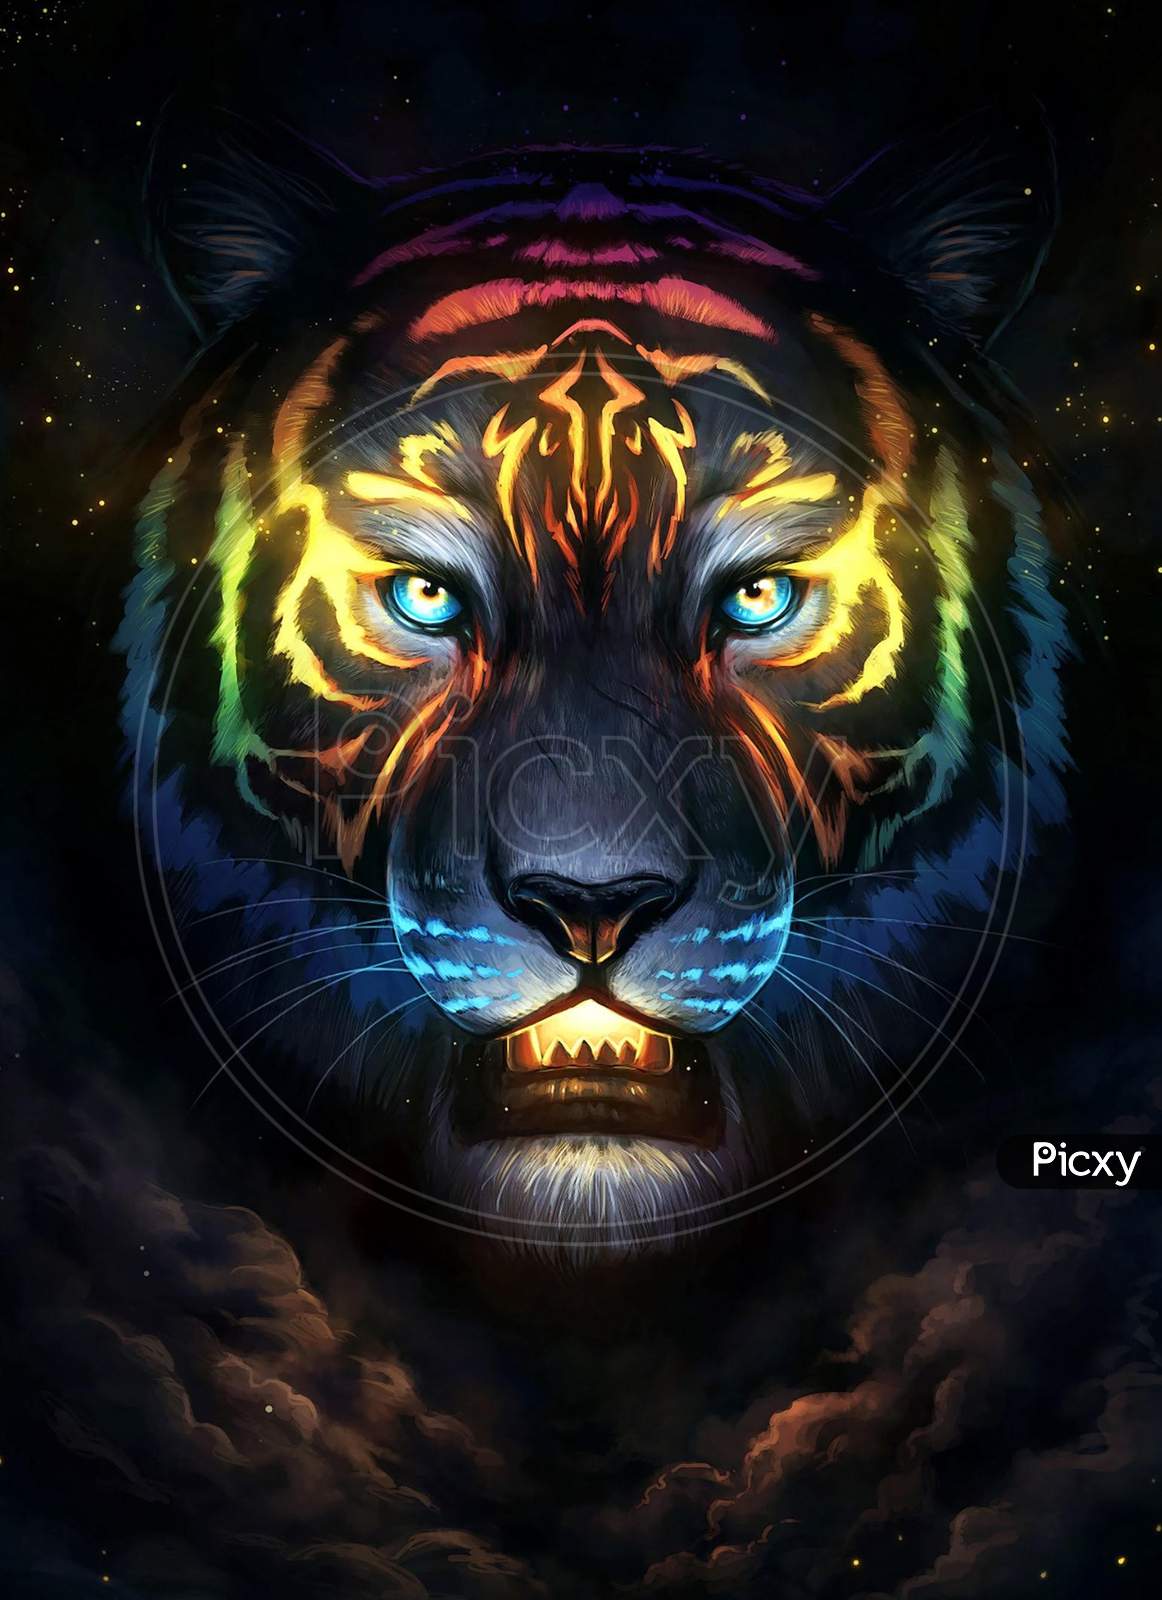 Artwork of a lion with many colors and shapes